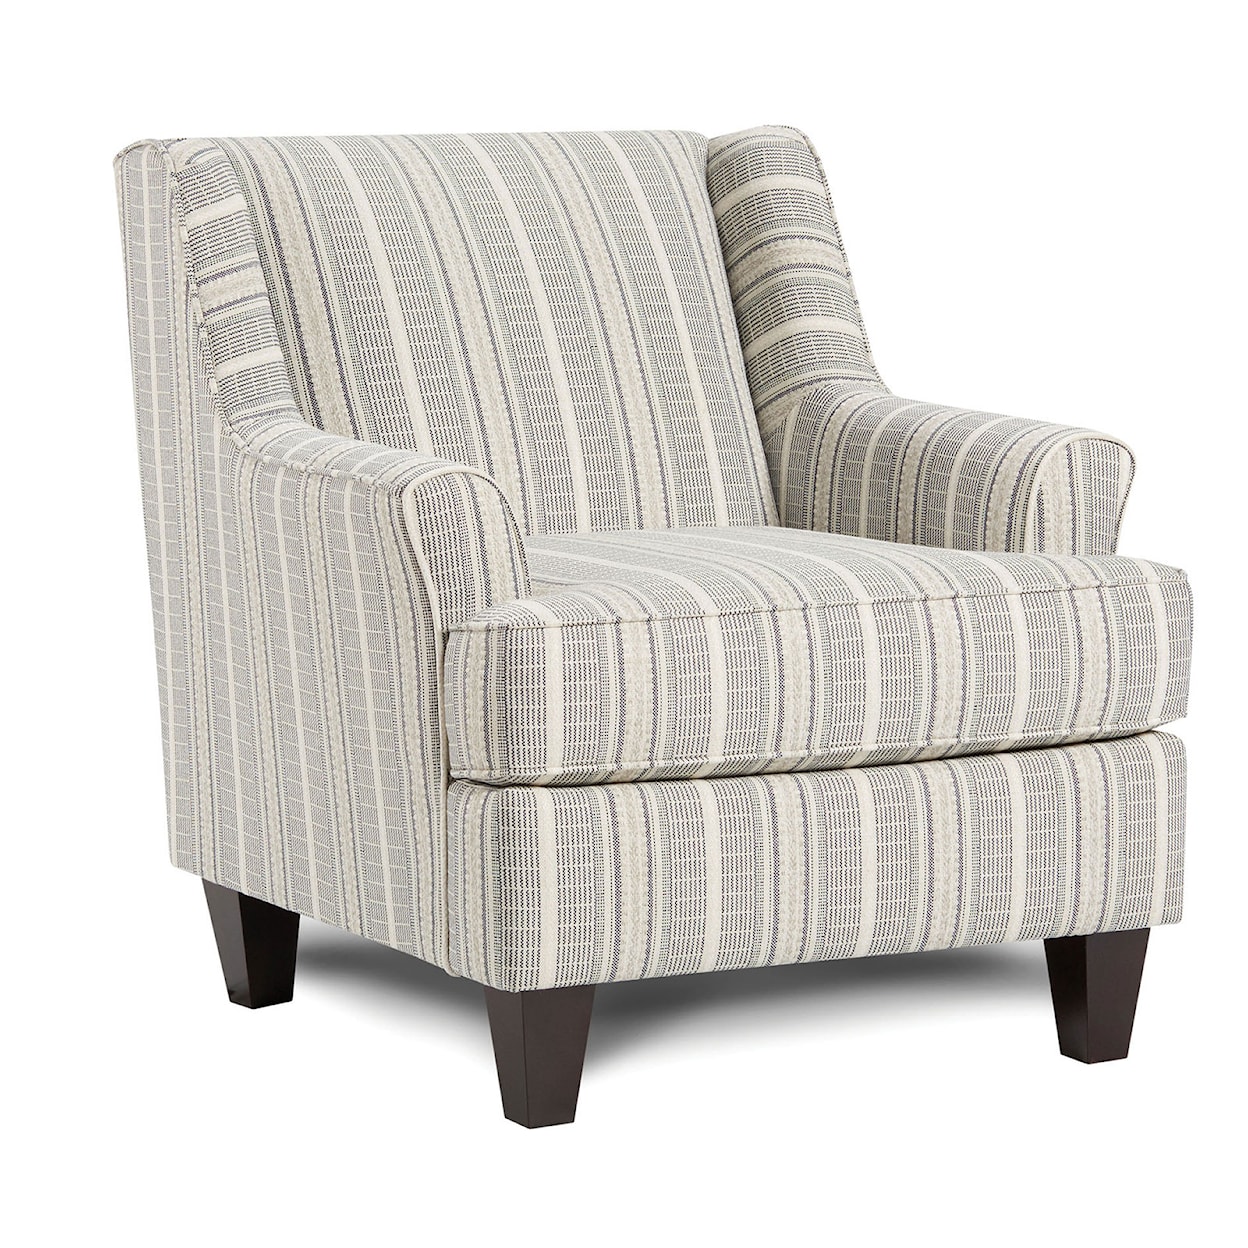 Furniture of America Porthcawl Accent Chair, Stripe